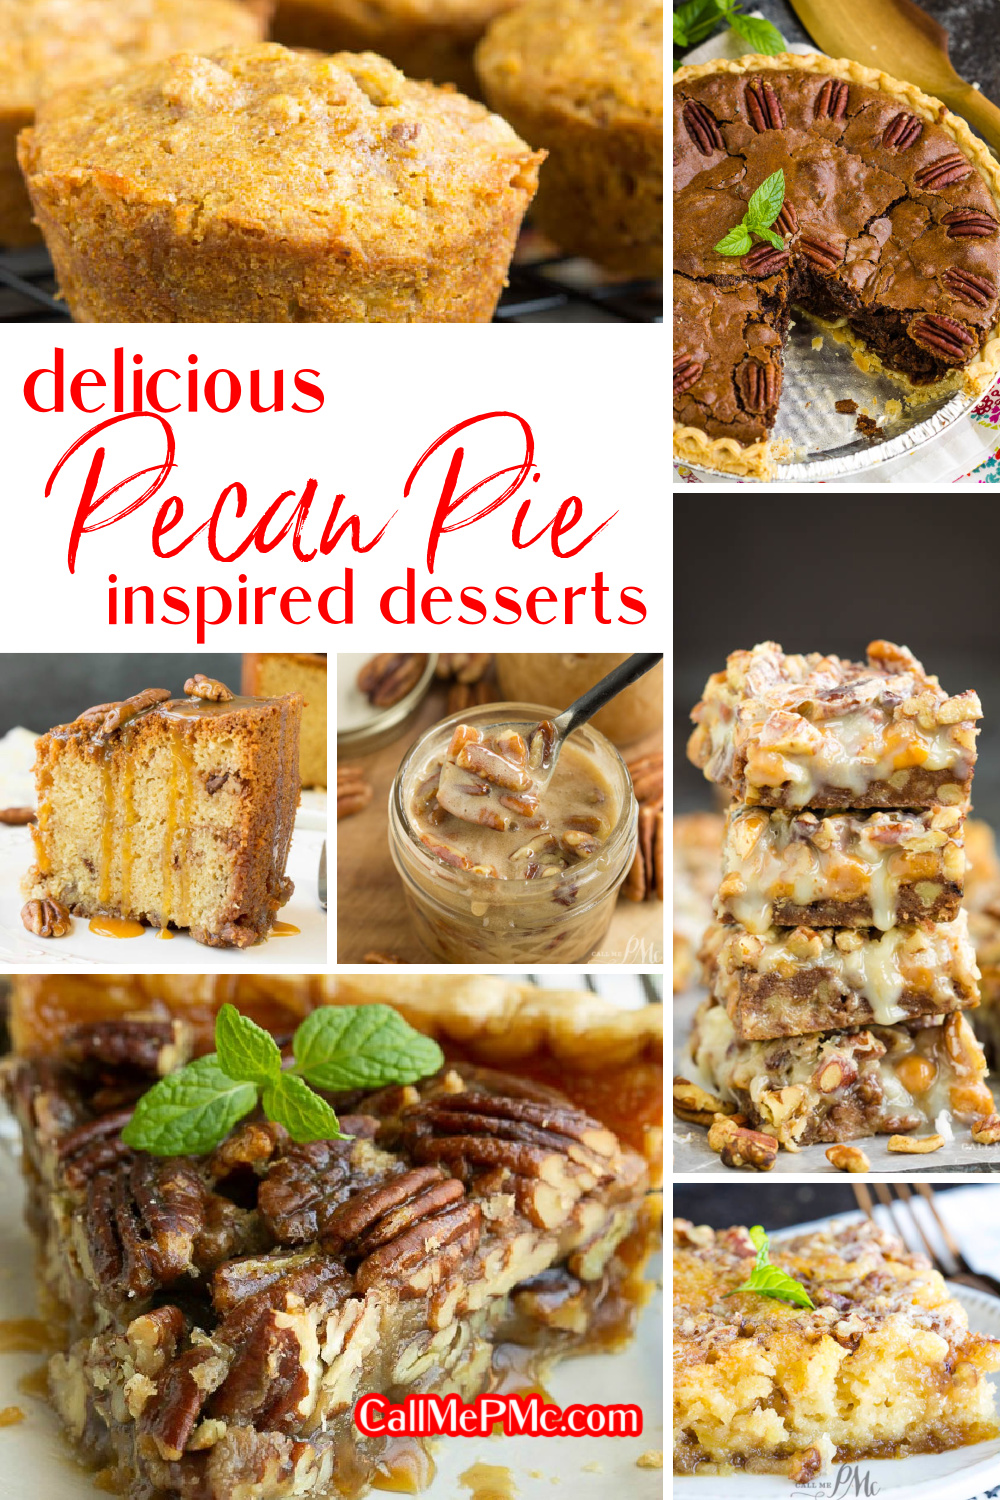 Pecan Pie Inspired Desserts - Cakes, pound cake, muffins, pies, bread pudding... If you like Pecan Pie, you'll love all these desserts!  #pecanpie #pecans #desserts #recipes